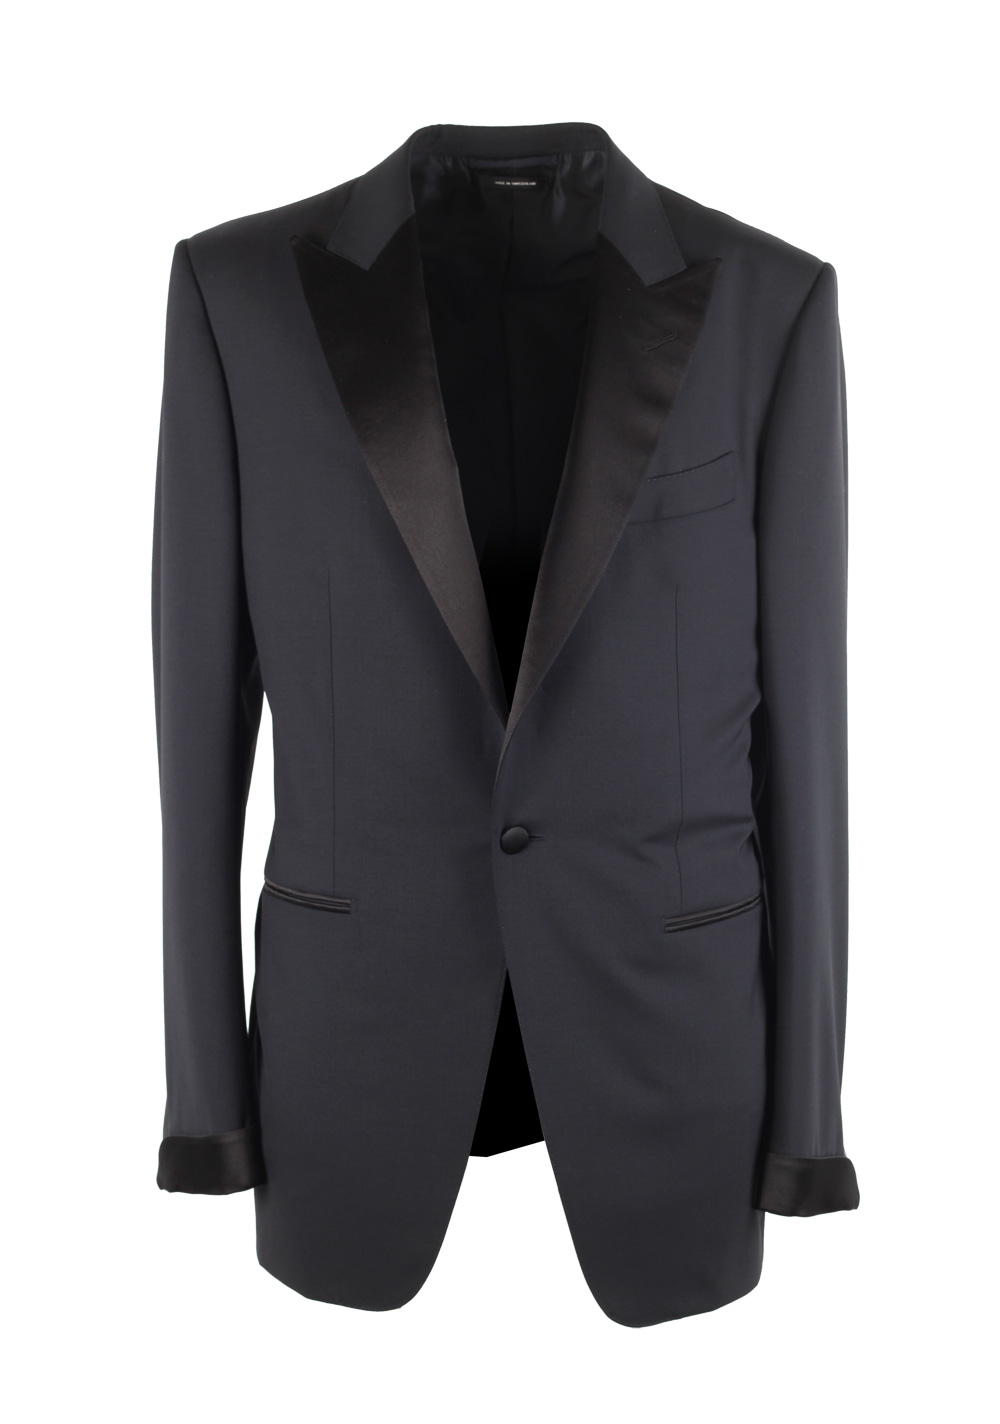 TOM FORD O’Connor Midnight Blue Tuxedo Smoking Suit Size 50L / 40L U.S ...